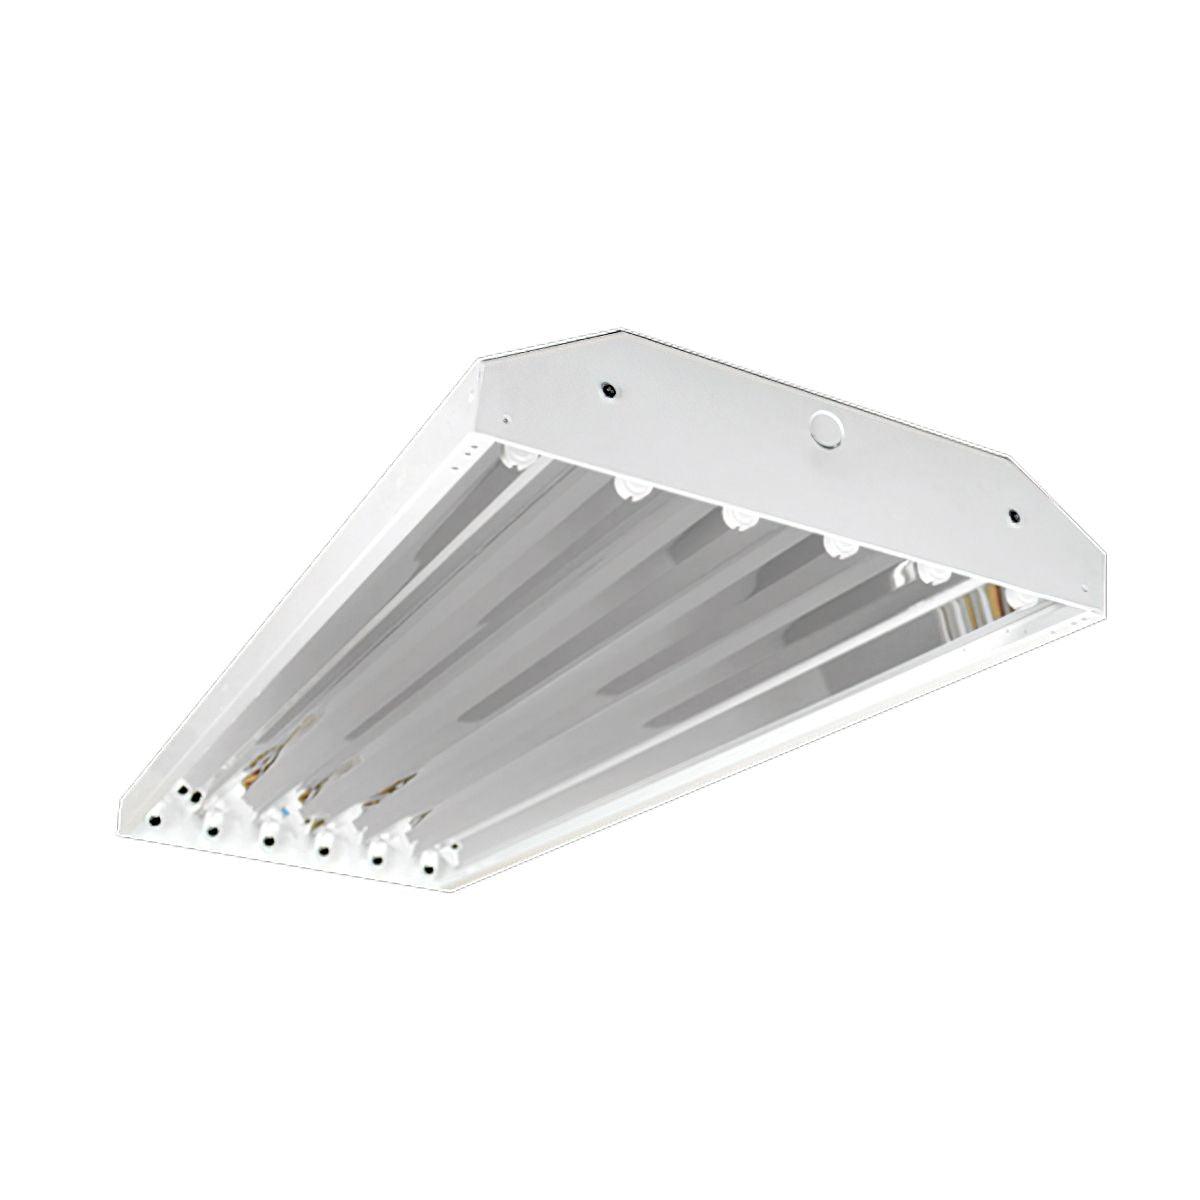 4ft LED Ready High Bay, 6 lamp Single End Wiring, T8 Bulbs Not Included